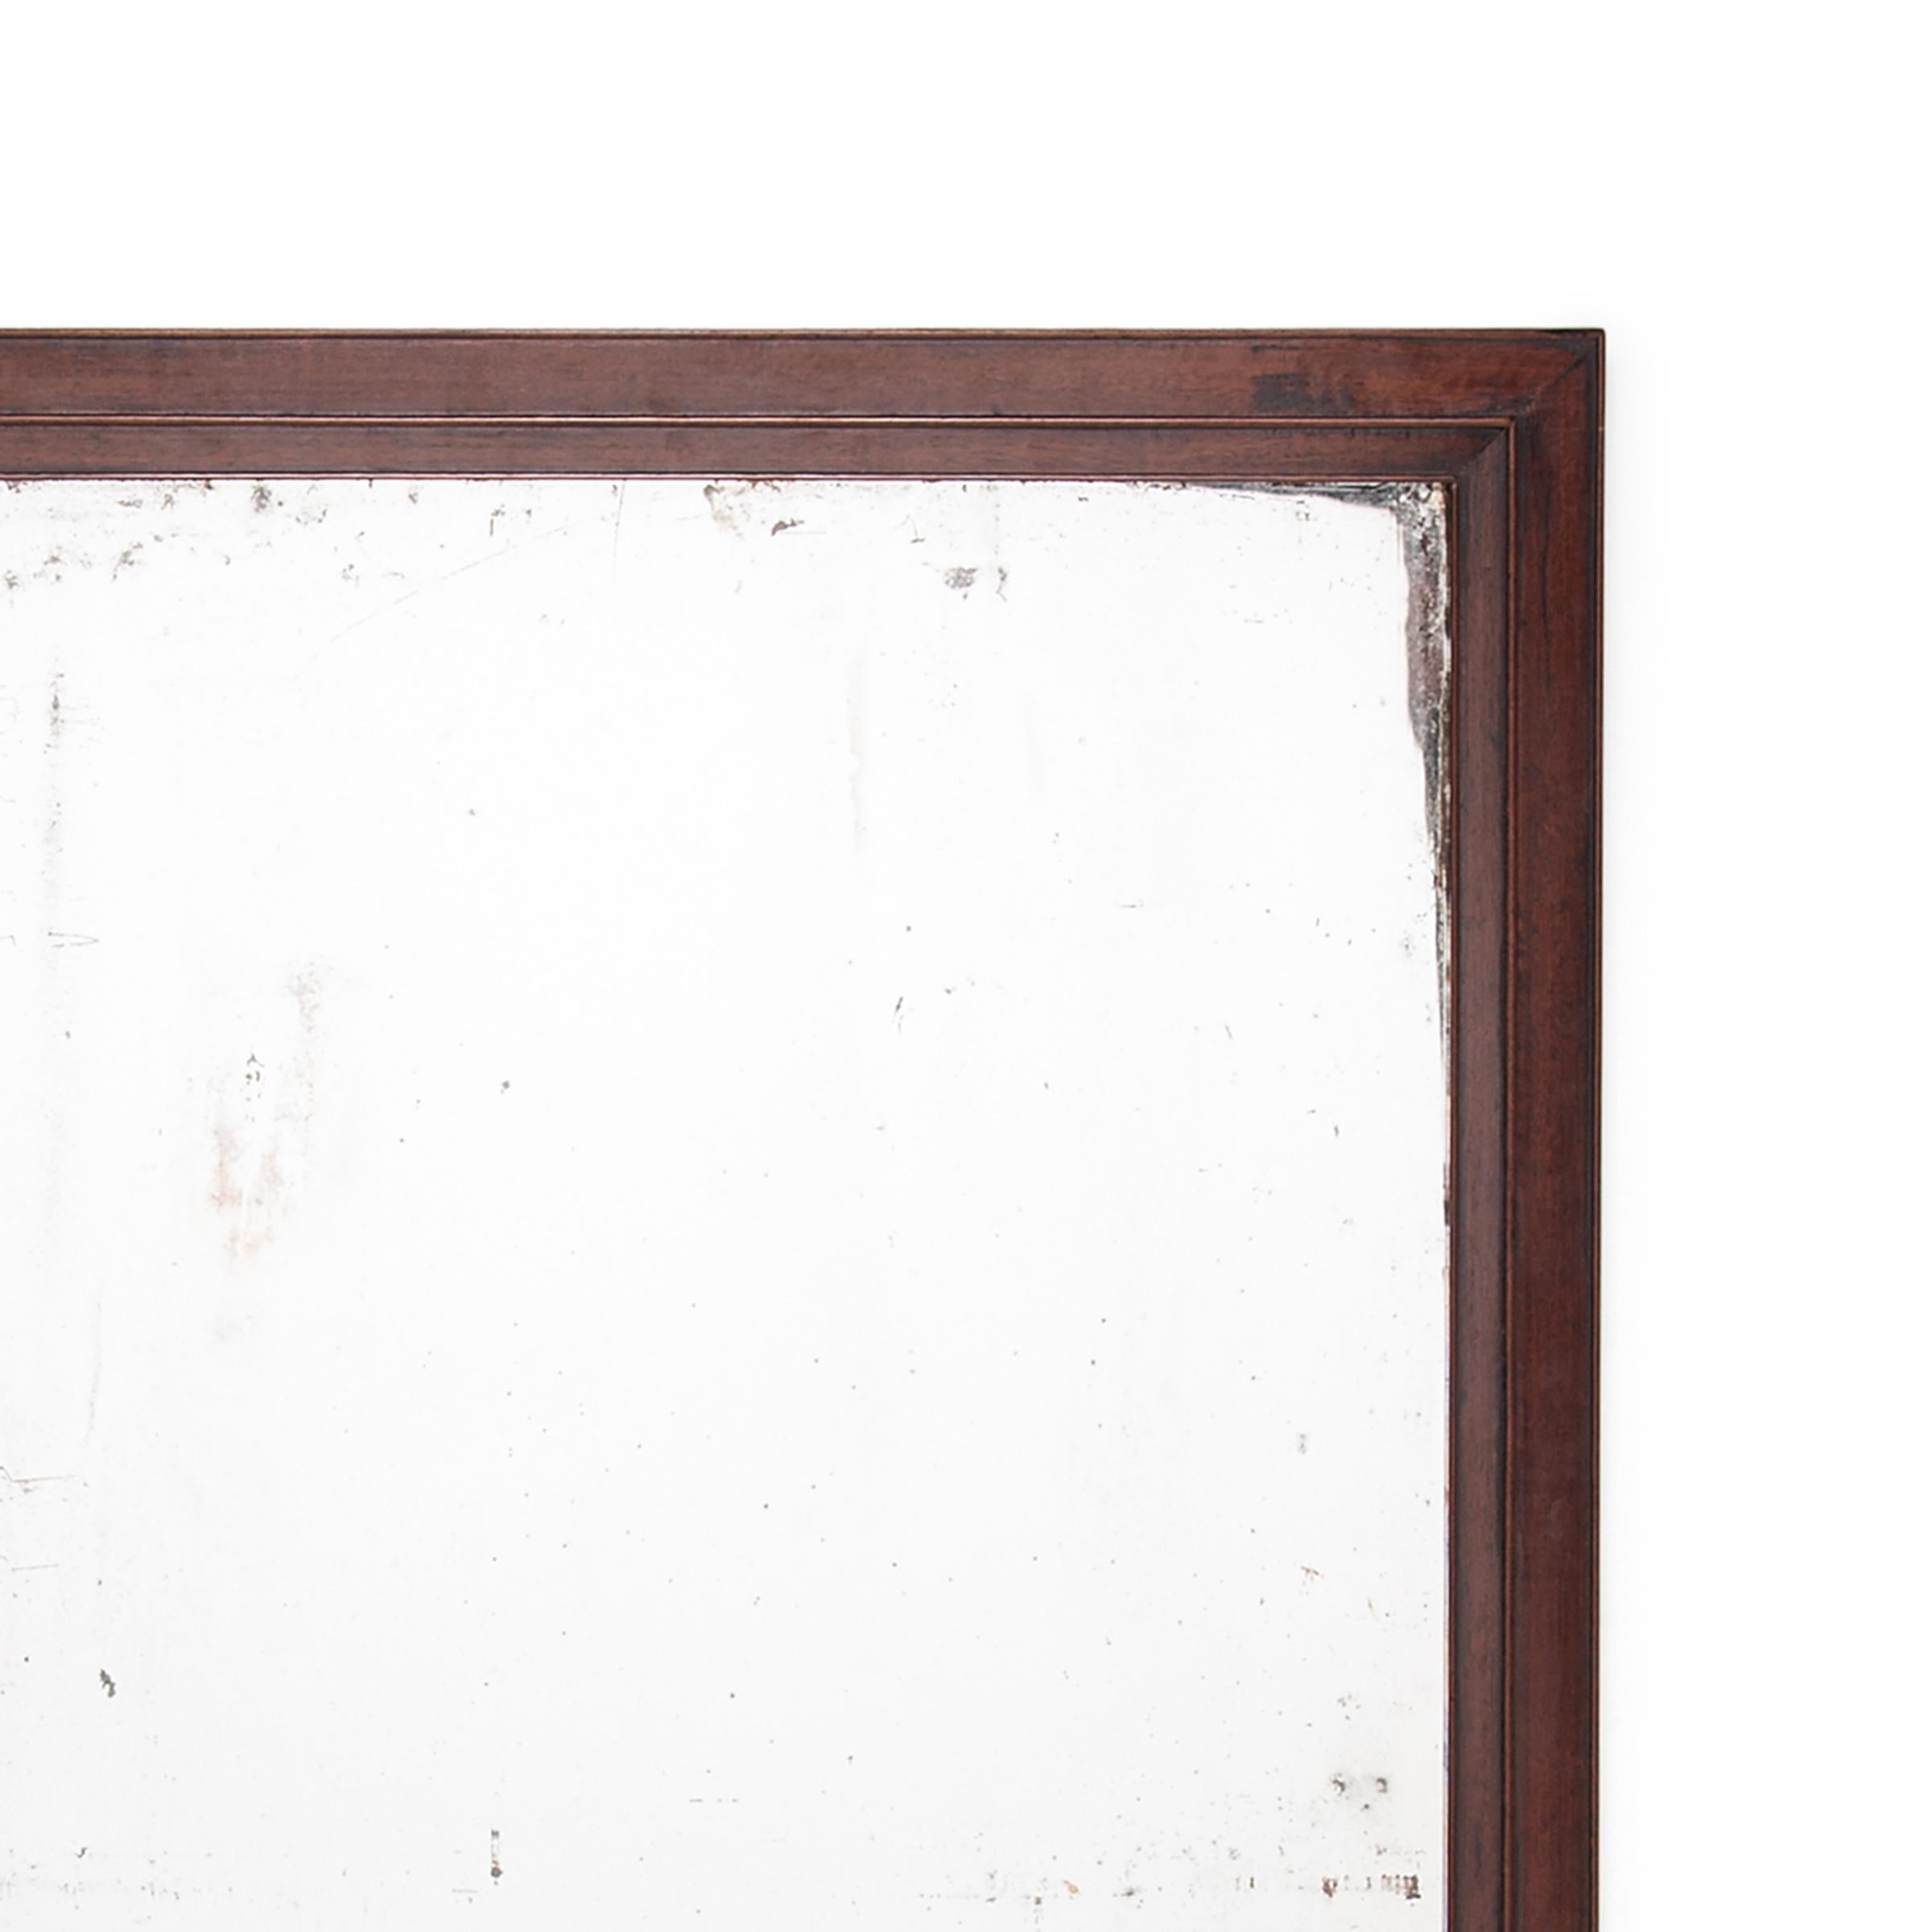 20th Century Chinese Calligrapher's Frame with Mirror, c. 1900 For Sale